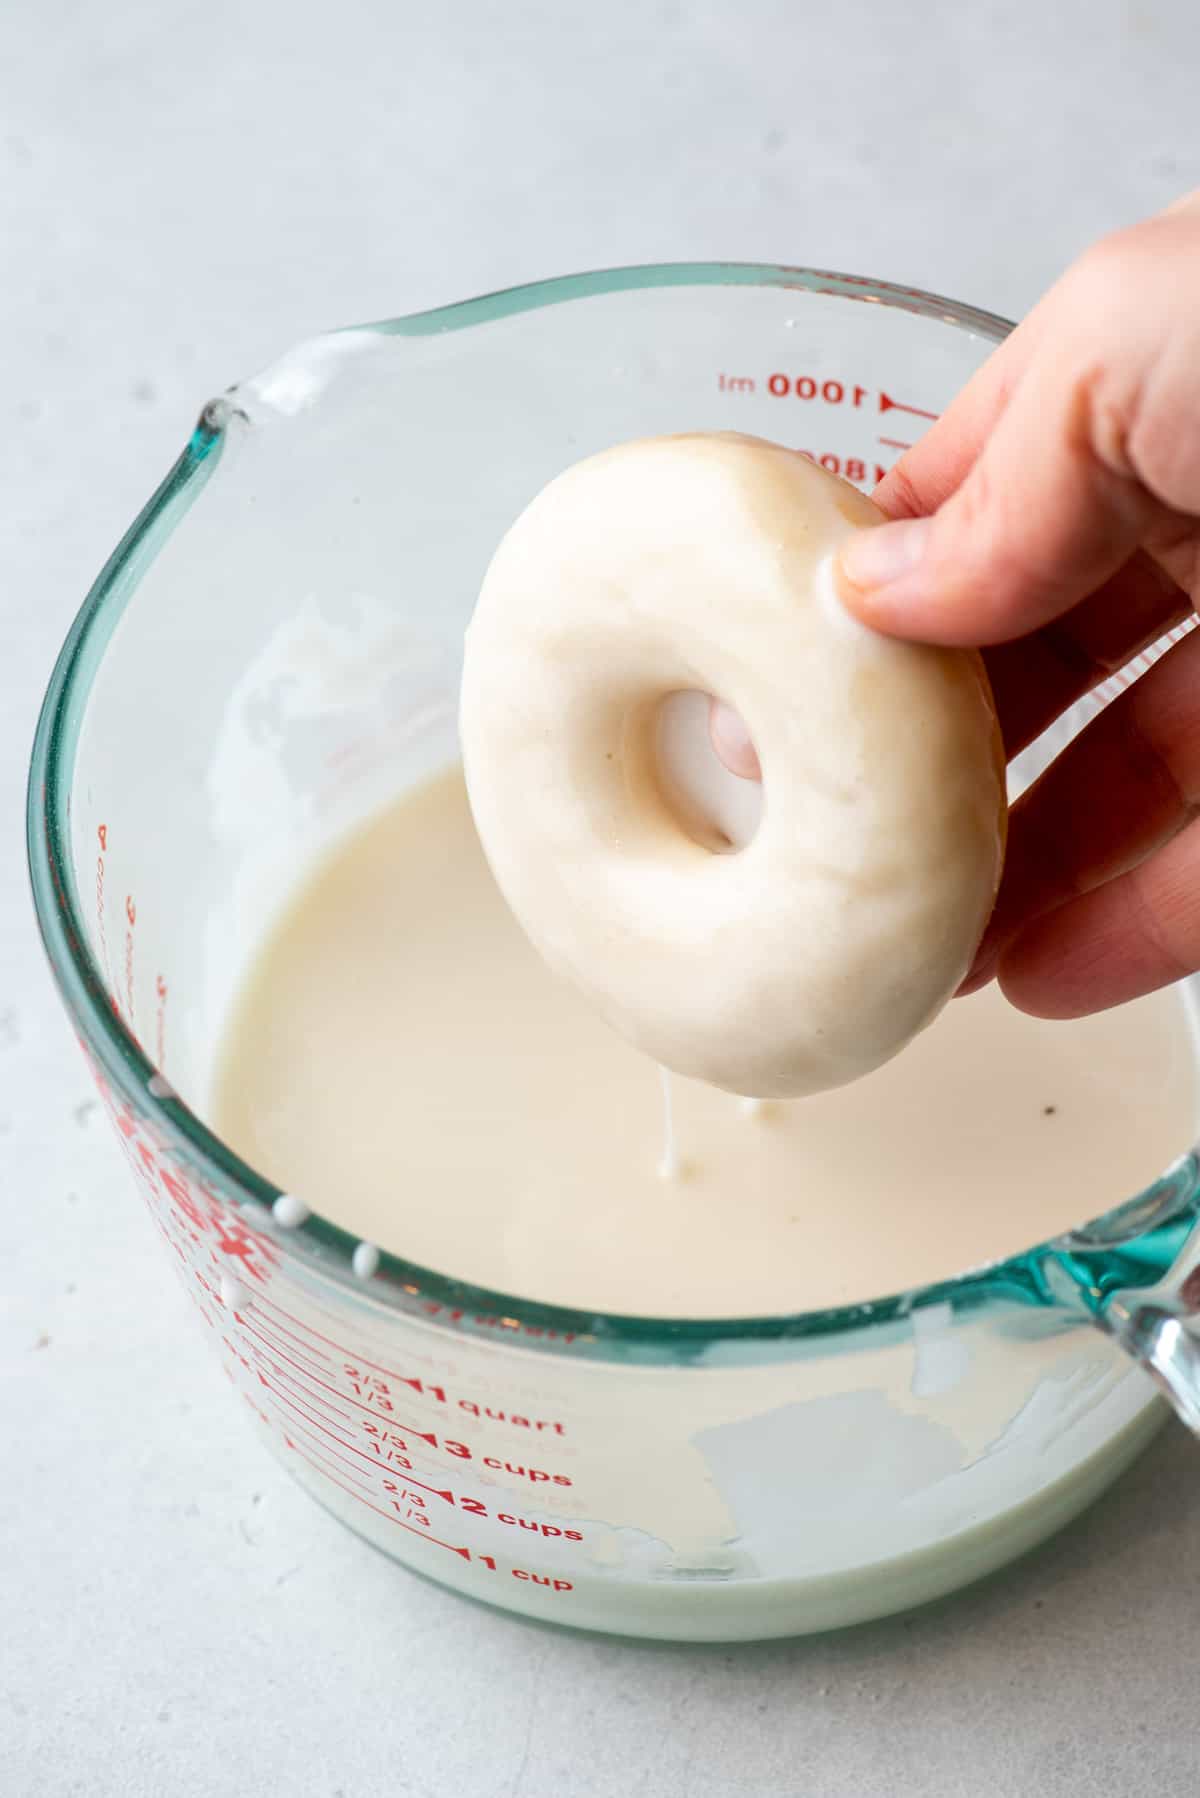 A hand dipping a donut into glaze